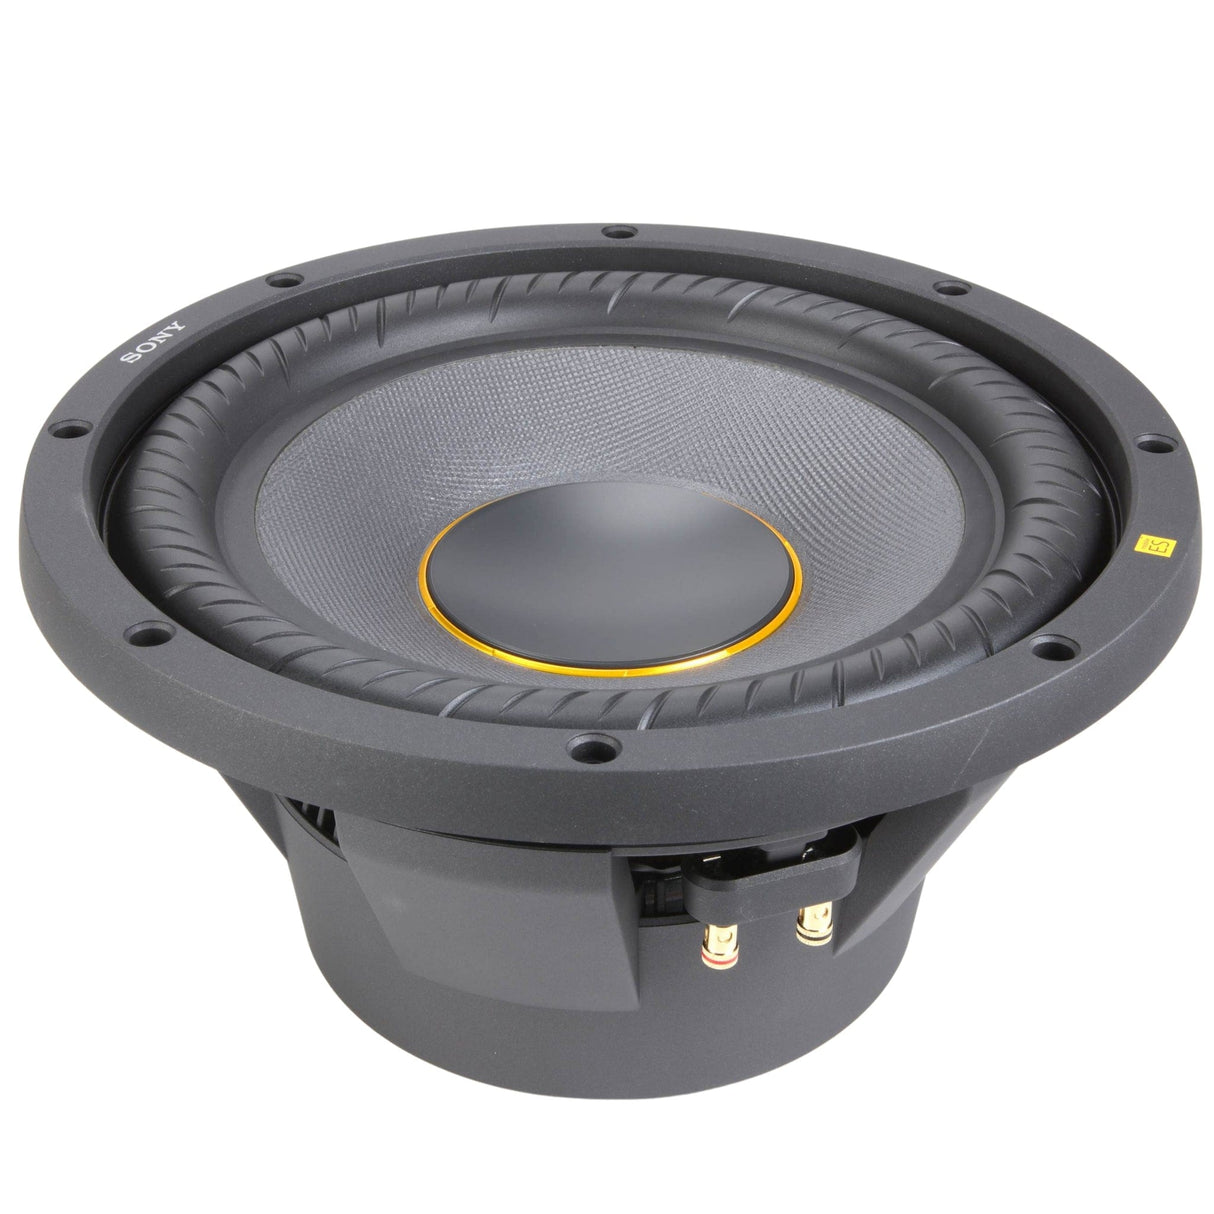 Sony Car Subwoofers Sony XS-W104ES 10" Mobile ES 4-Ohm Subwoofer